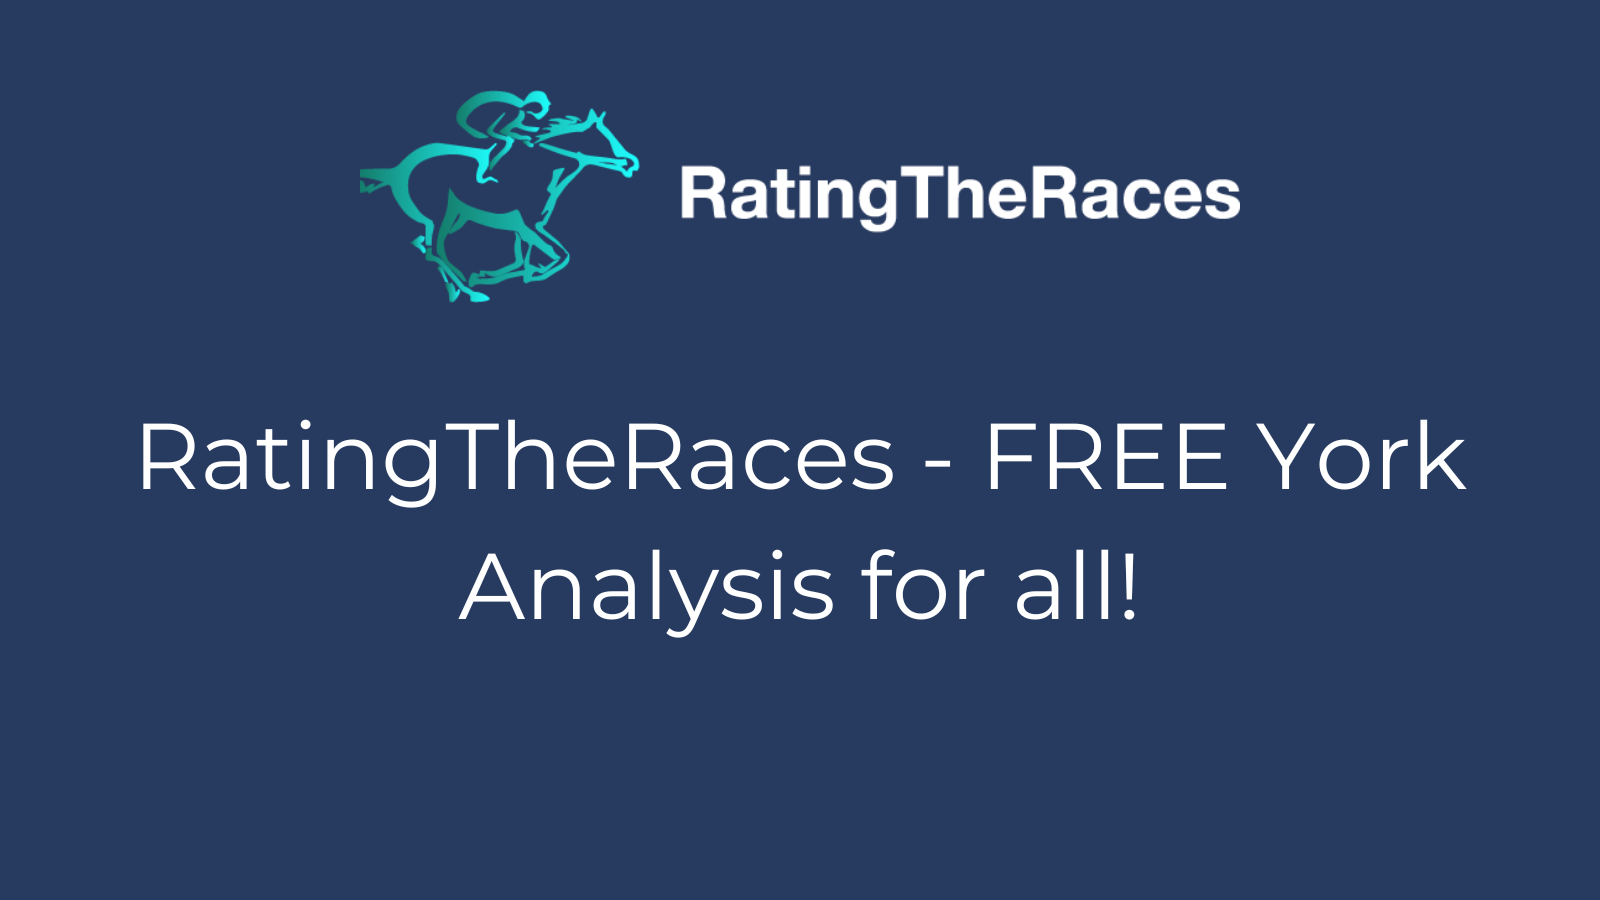 Free RatingTheRaces Analysis for York